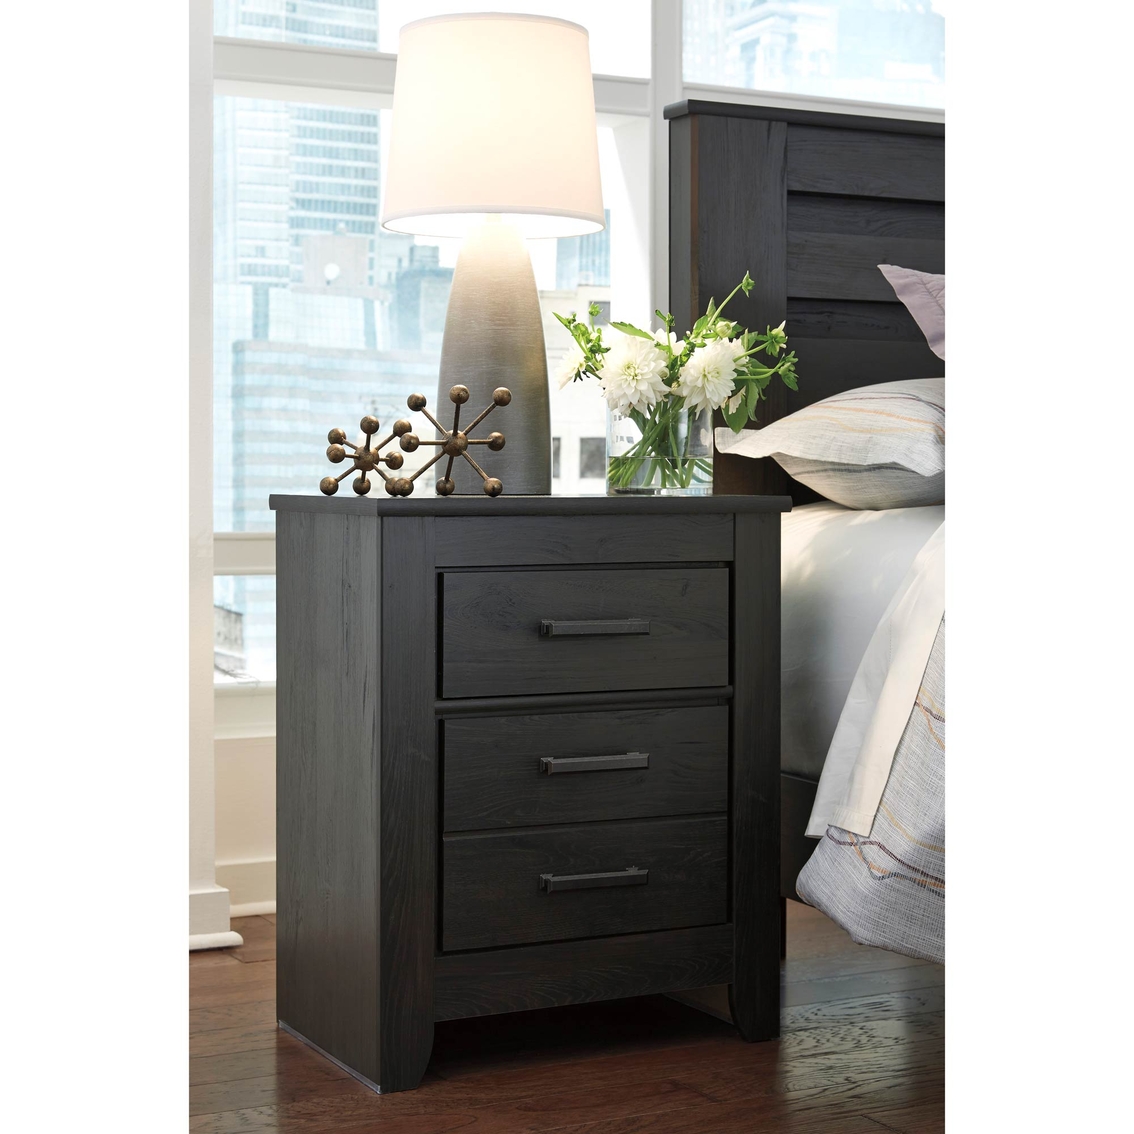 Signature Design by Ashley Brinxton 2 Drawer Nightstand - Image 2 of 3